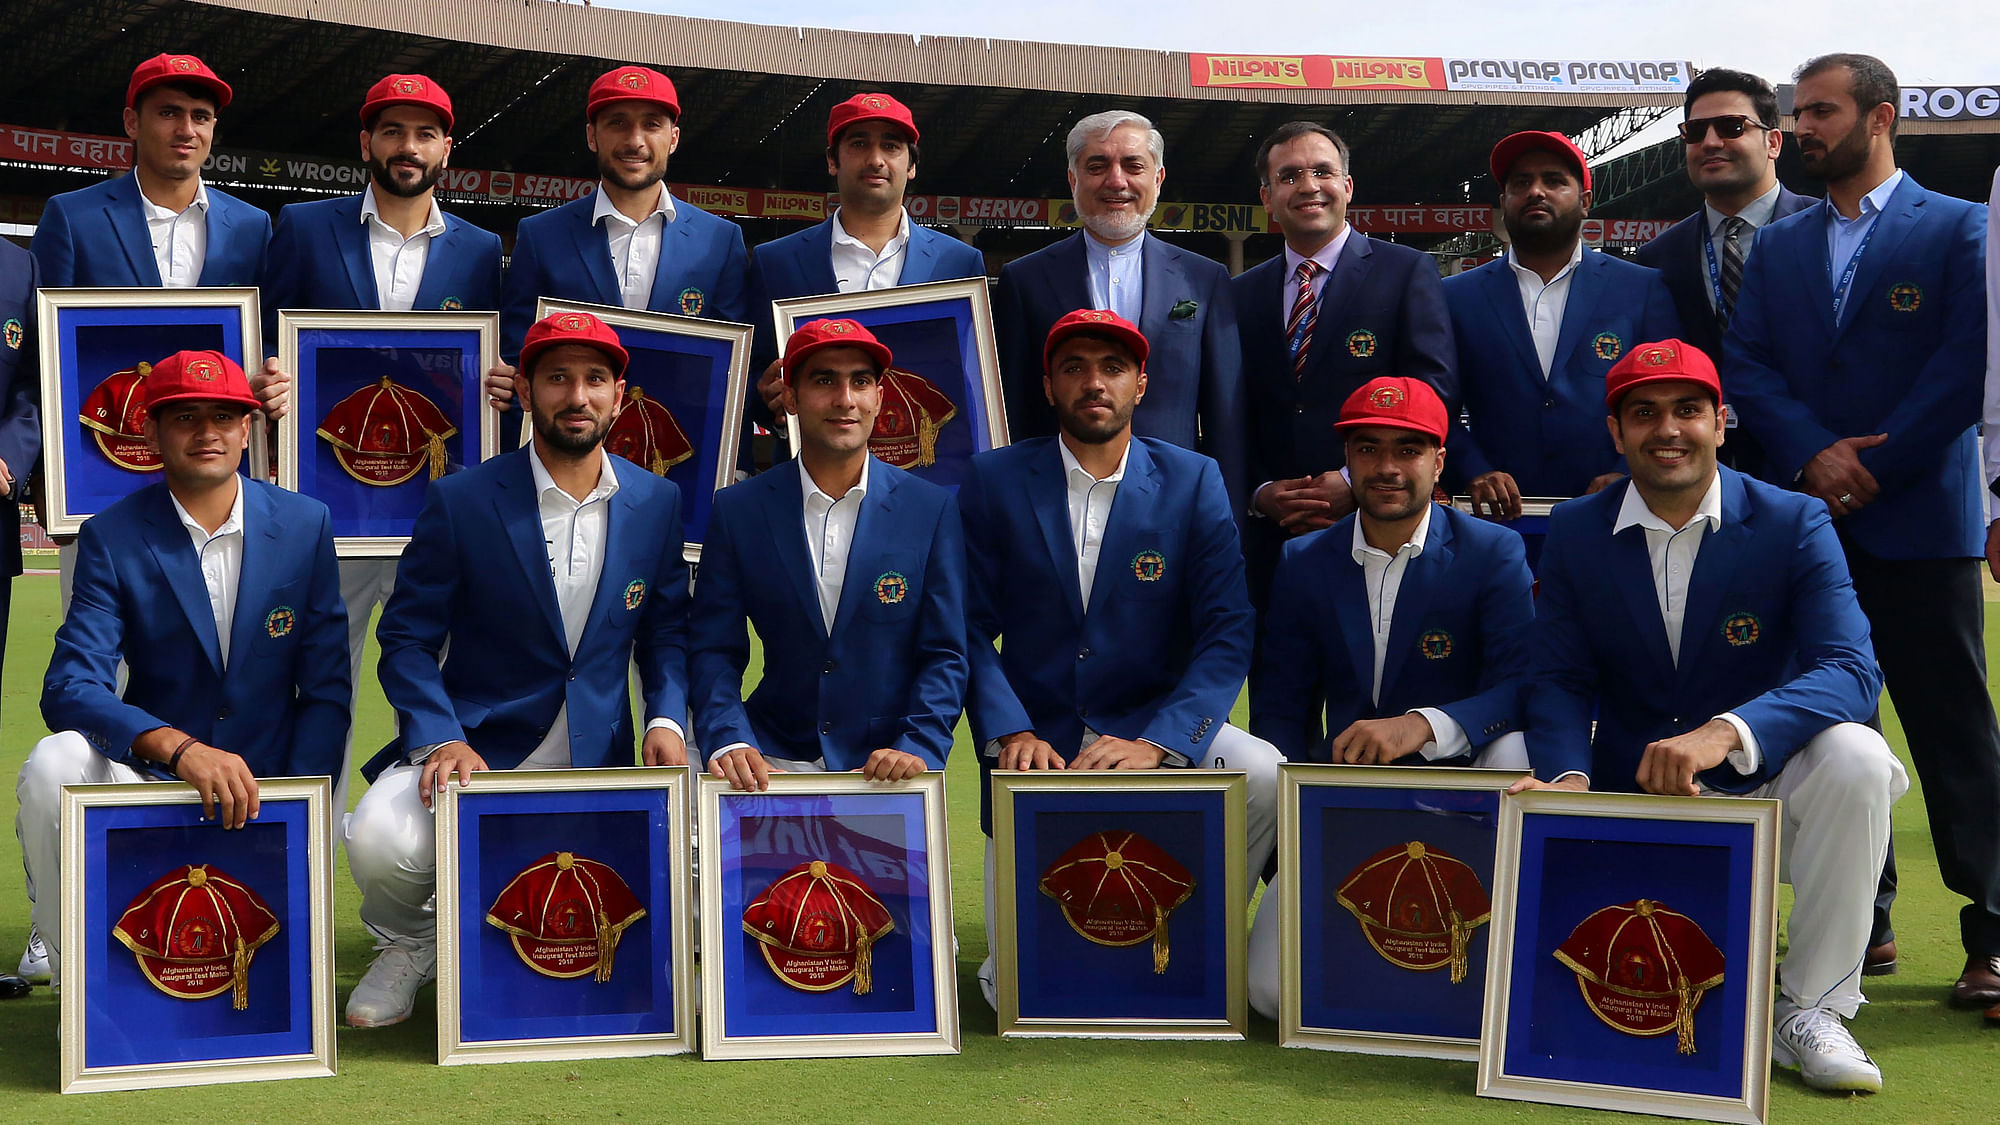 <div class="paragraphs"><p>Afghanistan pose with special caps after becoming a Test playing nation</p></div>